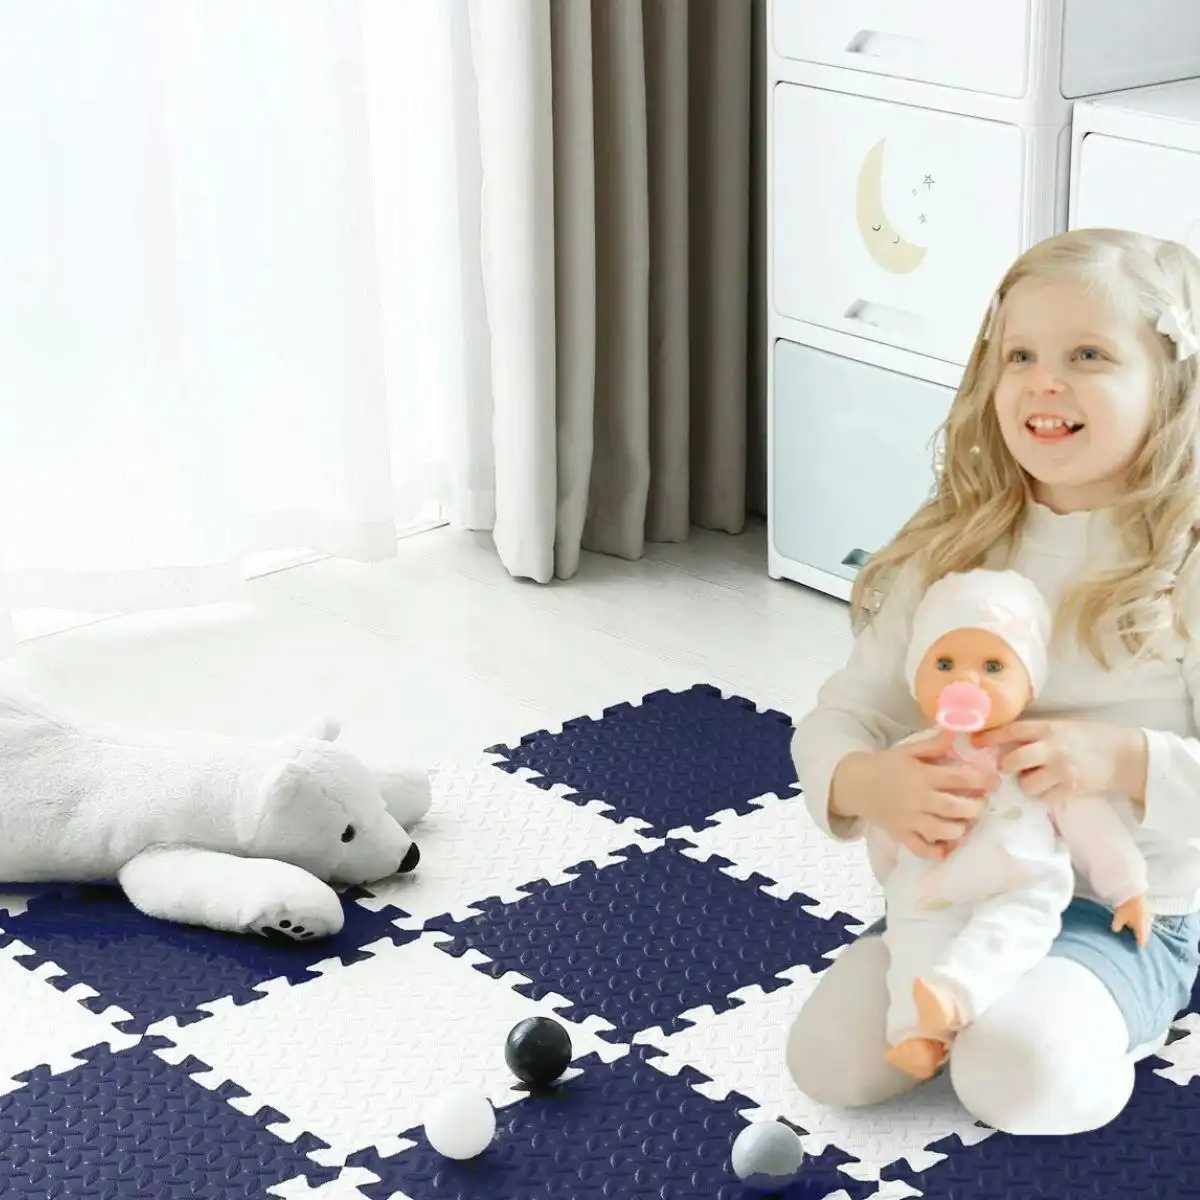 BabiesMart SoftSteps Baby Play Mat DIY Build Your Color Combination